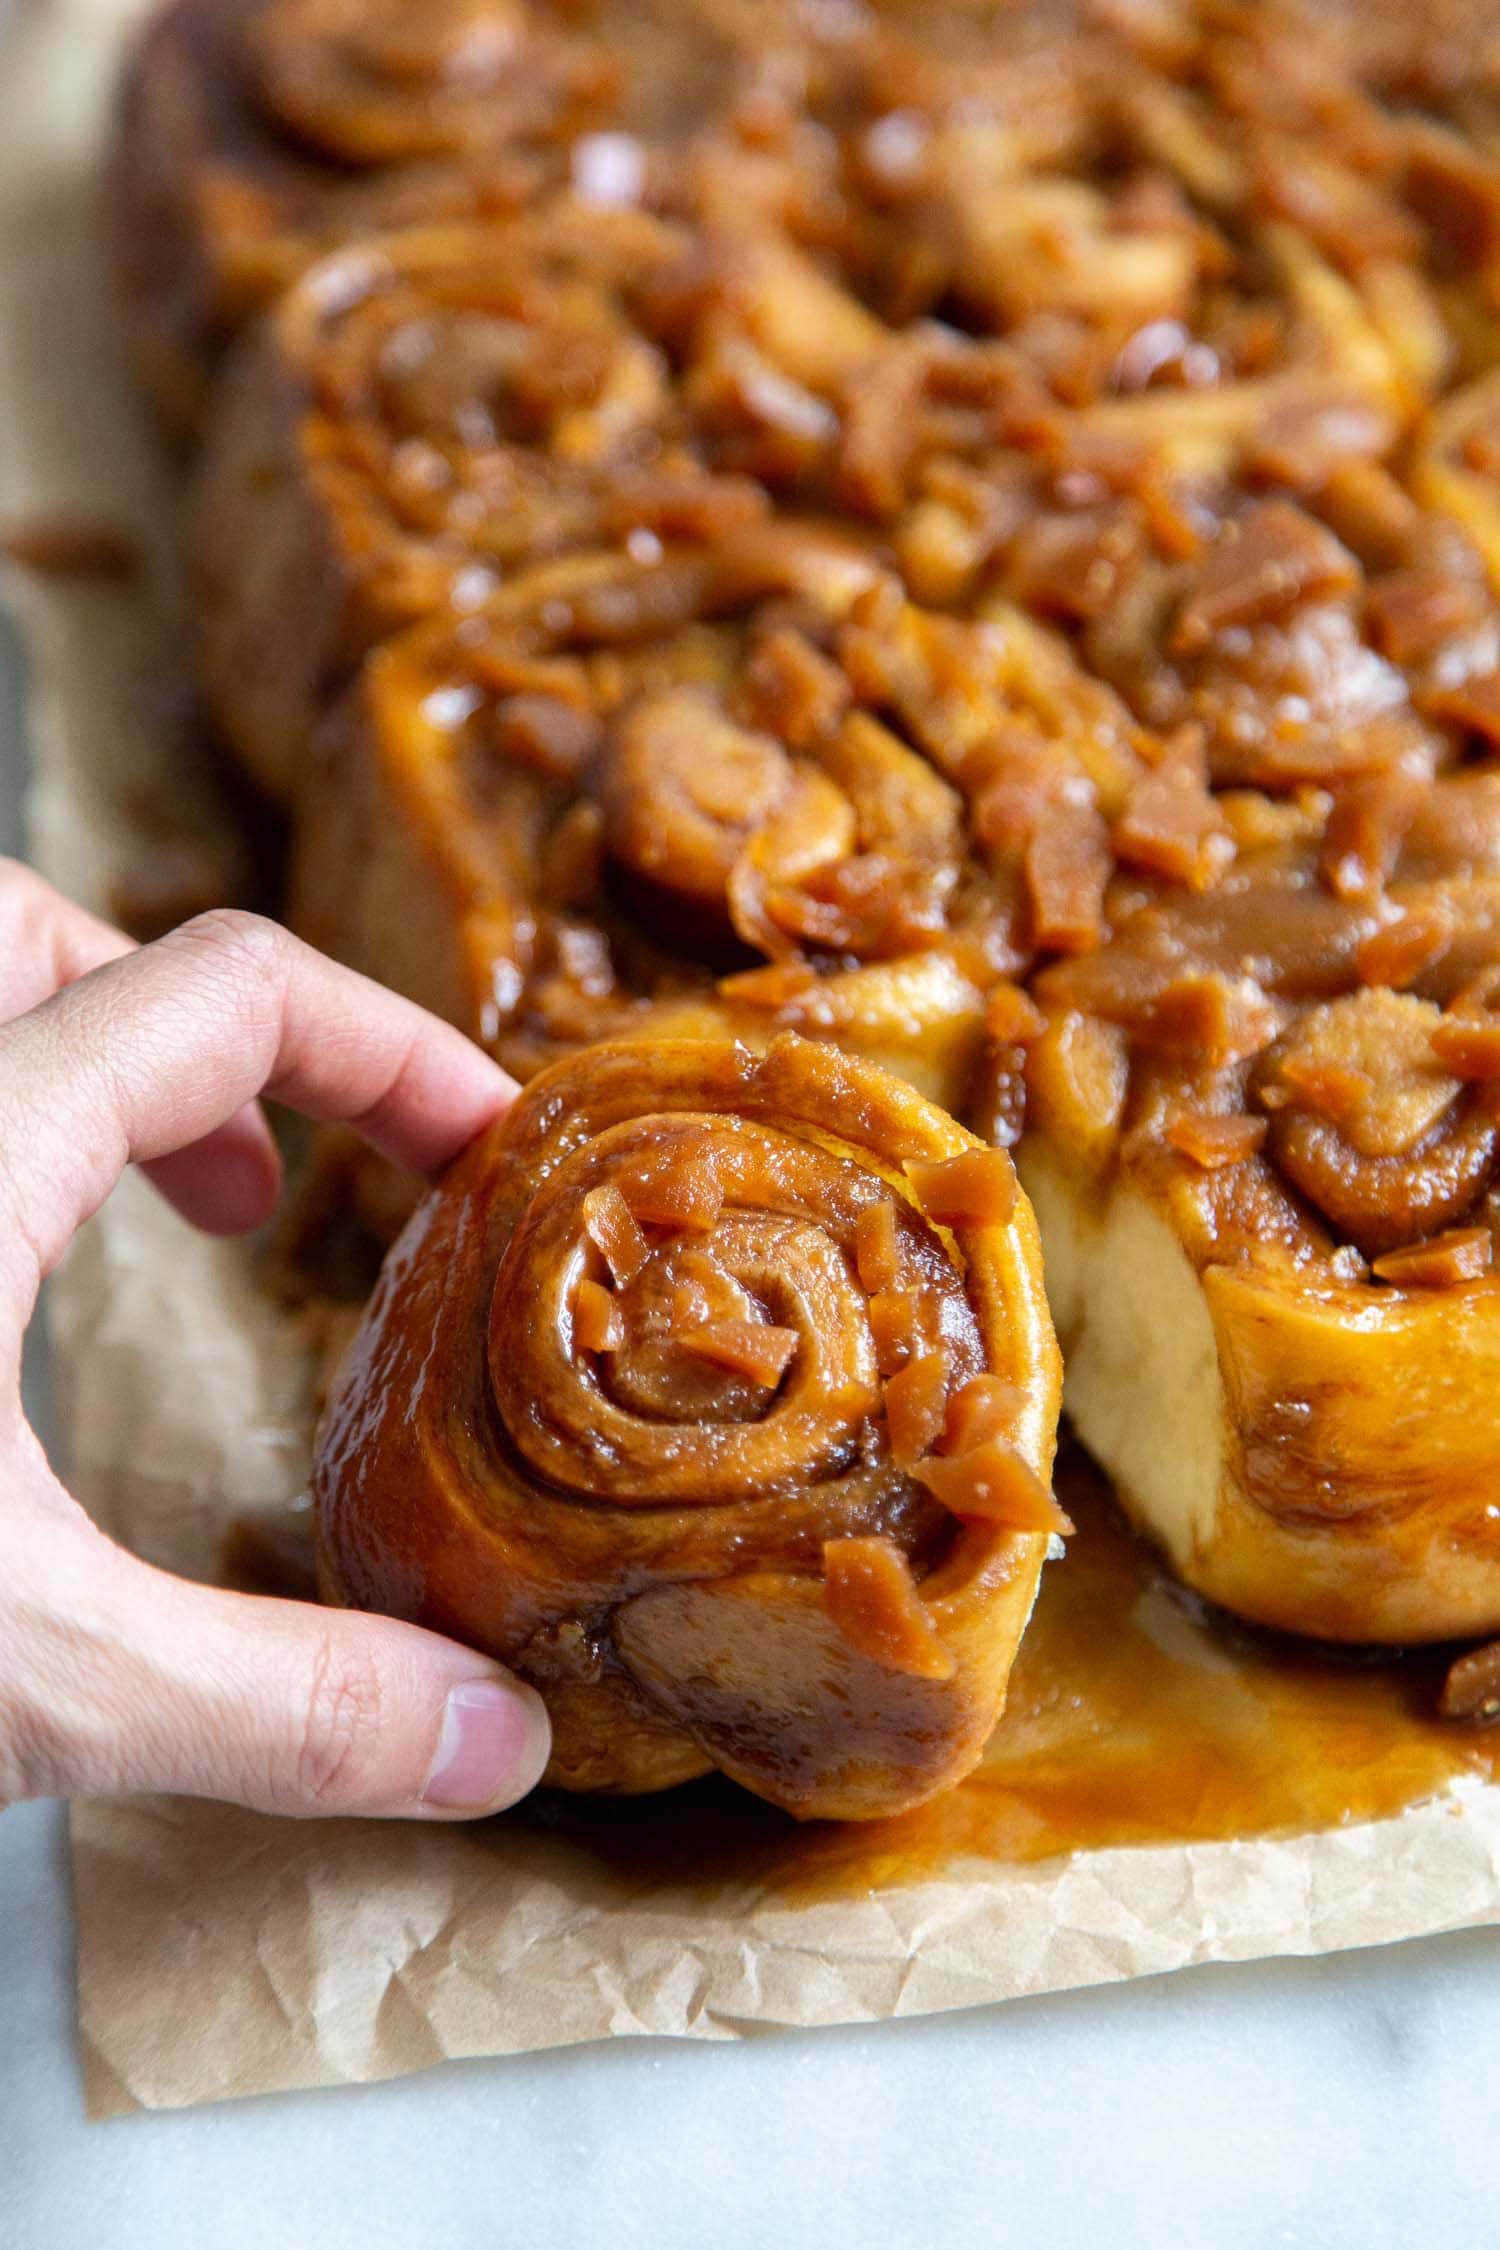 Toffee Sticky Buns. These warm and fluffy buns are filled with cinnamon sugar, coated with a sweet molasses glaze, and topped with chopped toffee bits! #breakfast #brunch #holidays #toffee #stickybuns